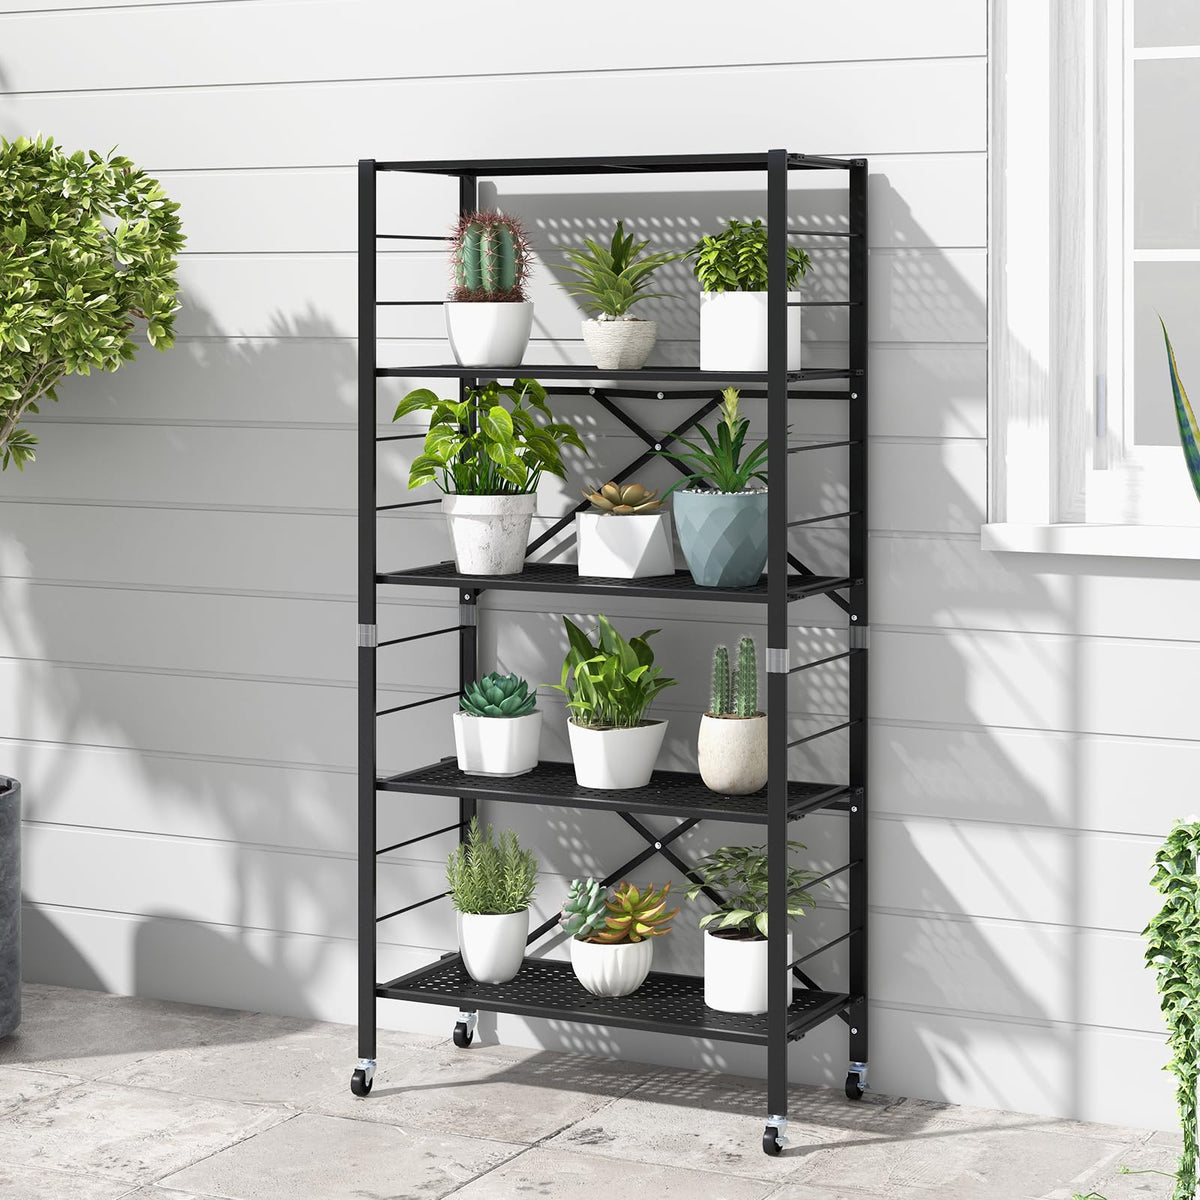 Giantex Folding Storage Shelves, 5-Tier Metal Collapsible Shelves with Wheels